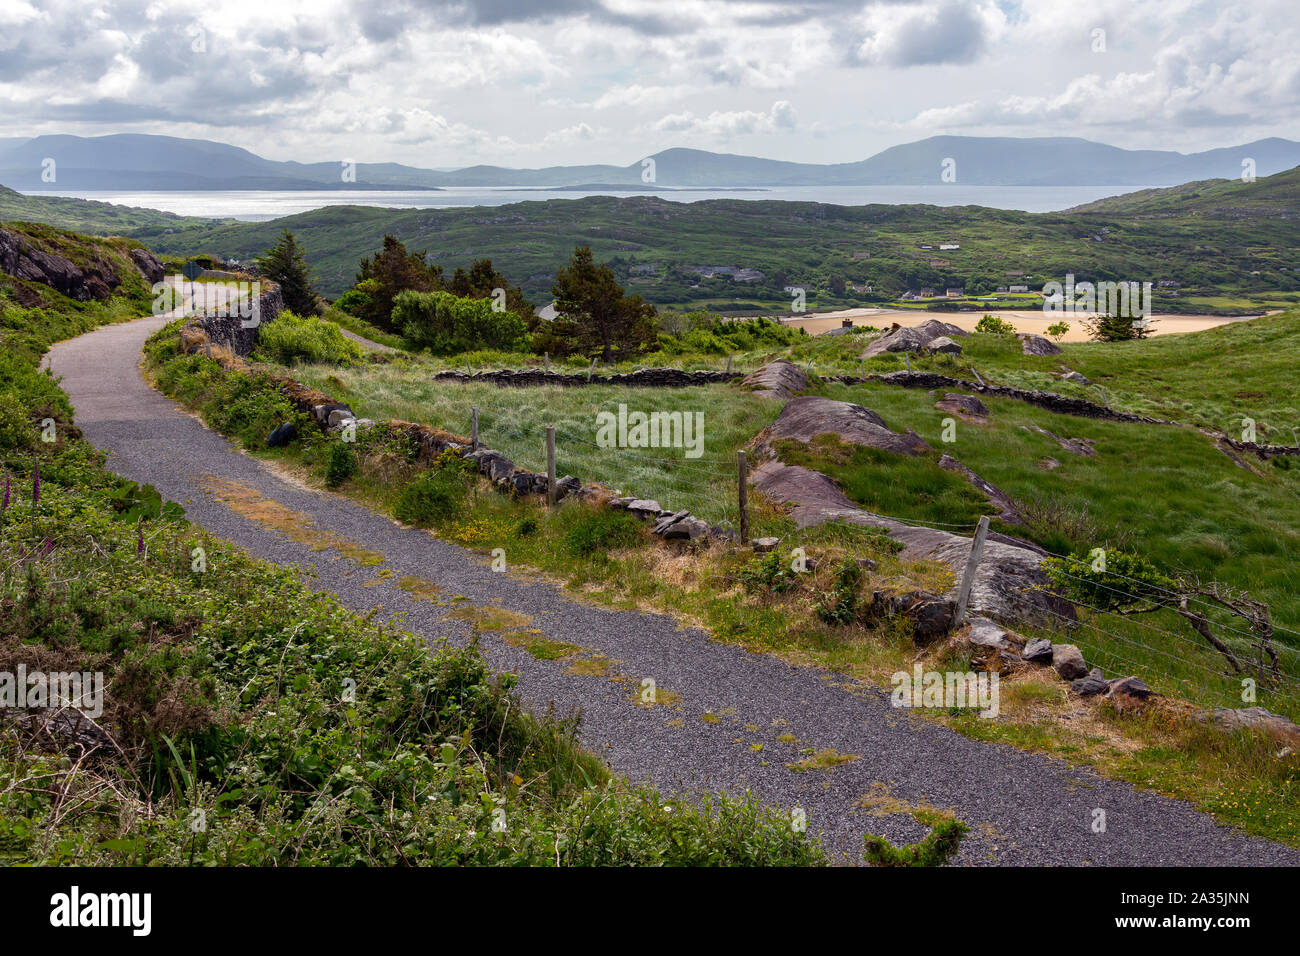 Scenic coastal landscape on the Ring of Kerry, a part of the Wild Atlantic Way on the west coast of the Republic of Ireland. Stock Photo